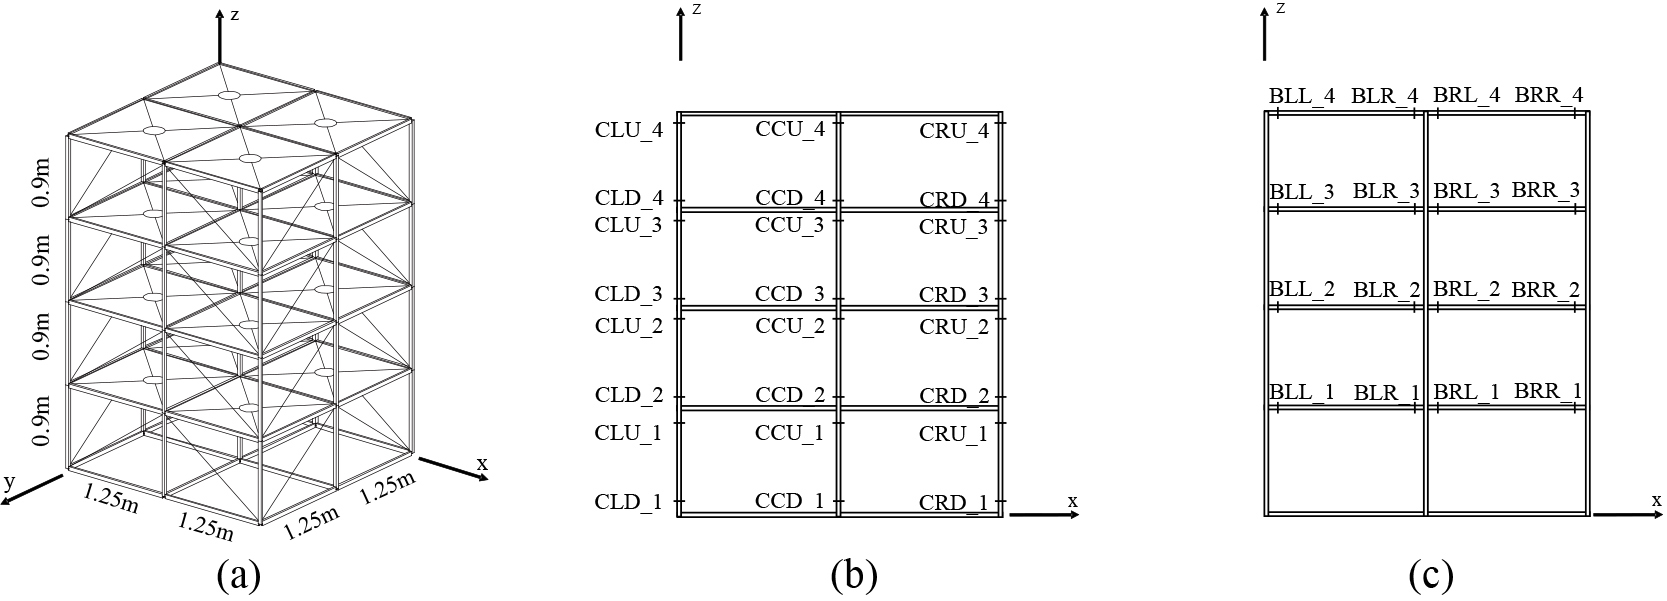 Example structure (ASCE benchmark model): (a) perspective view; (b) sensor locations in column; and (c) sensor locations in beam.